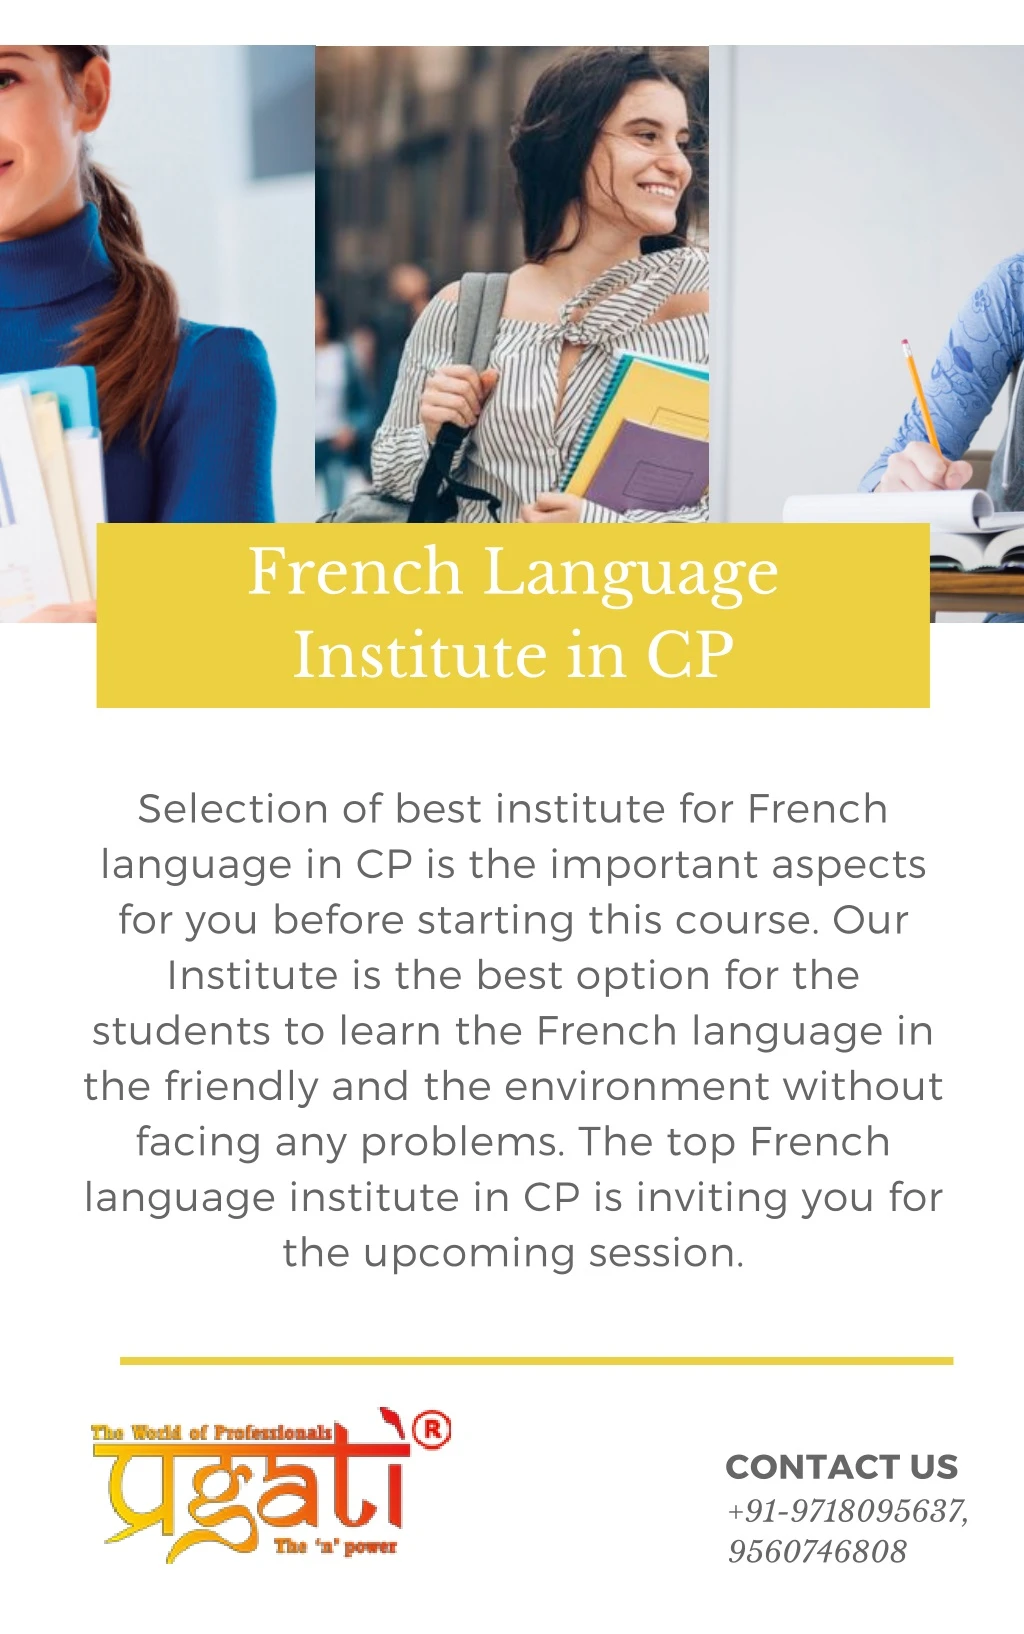 french language institute in cp